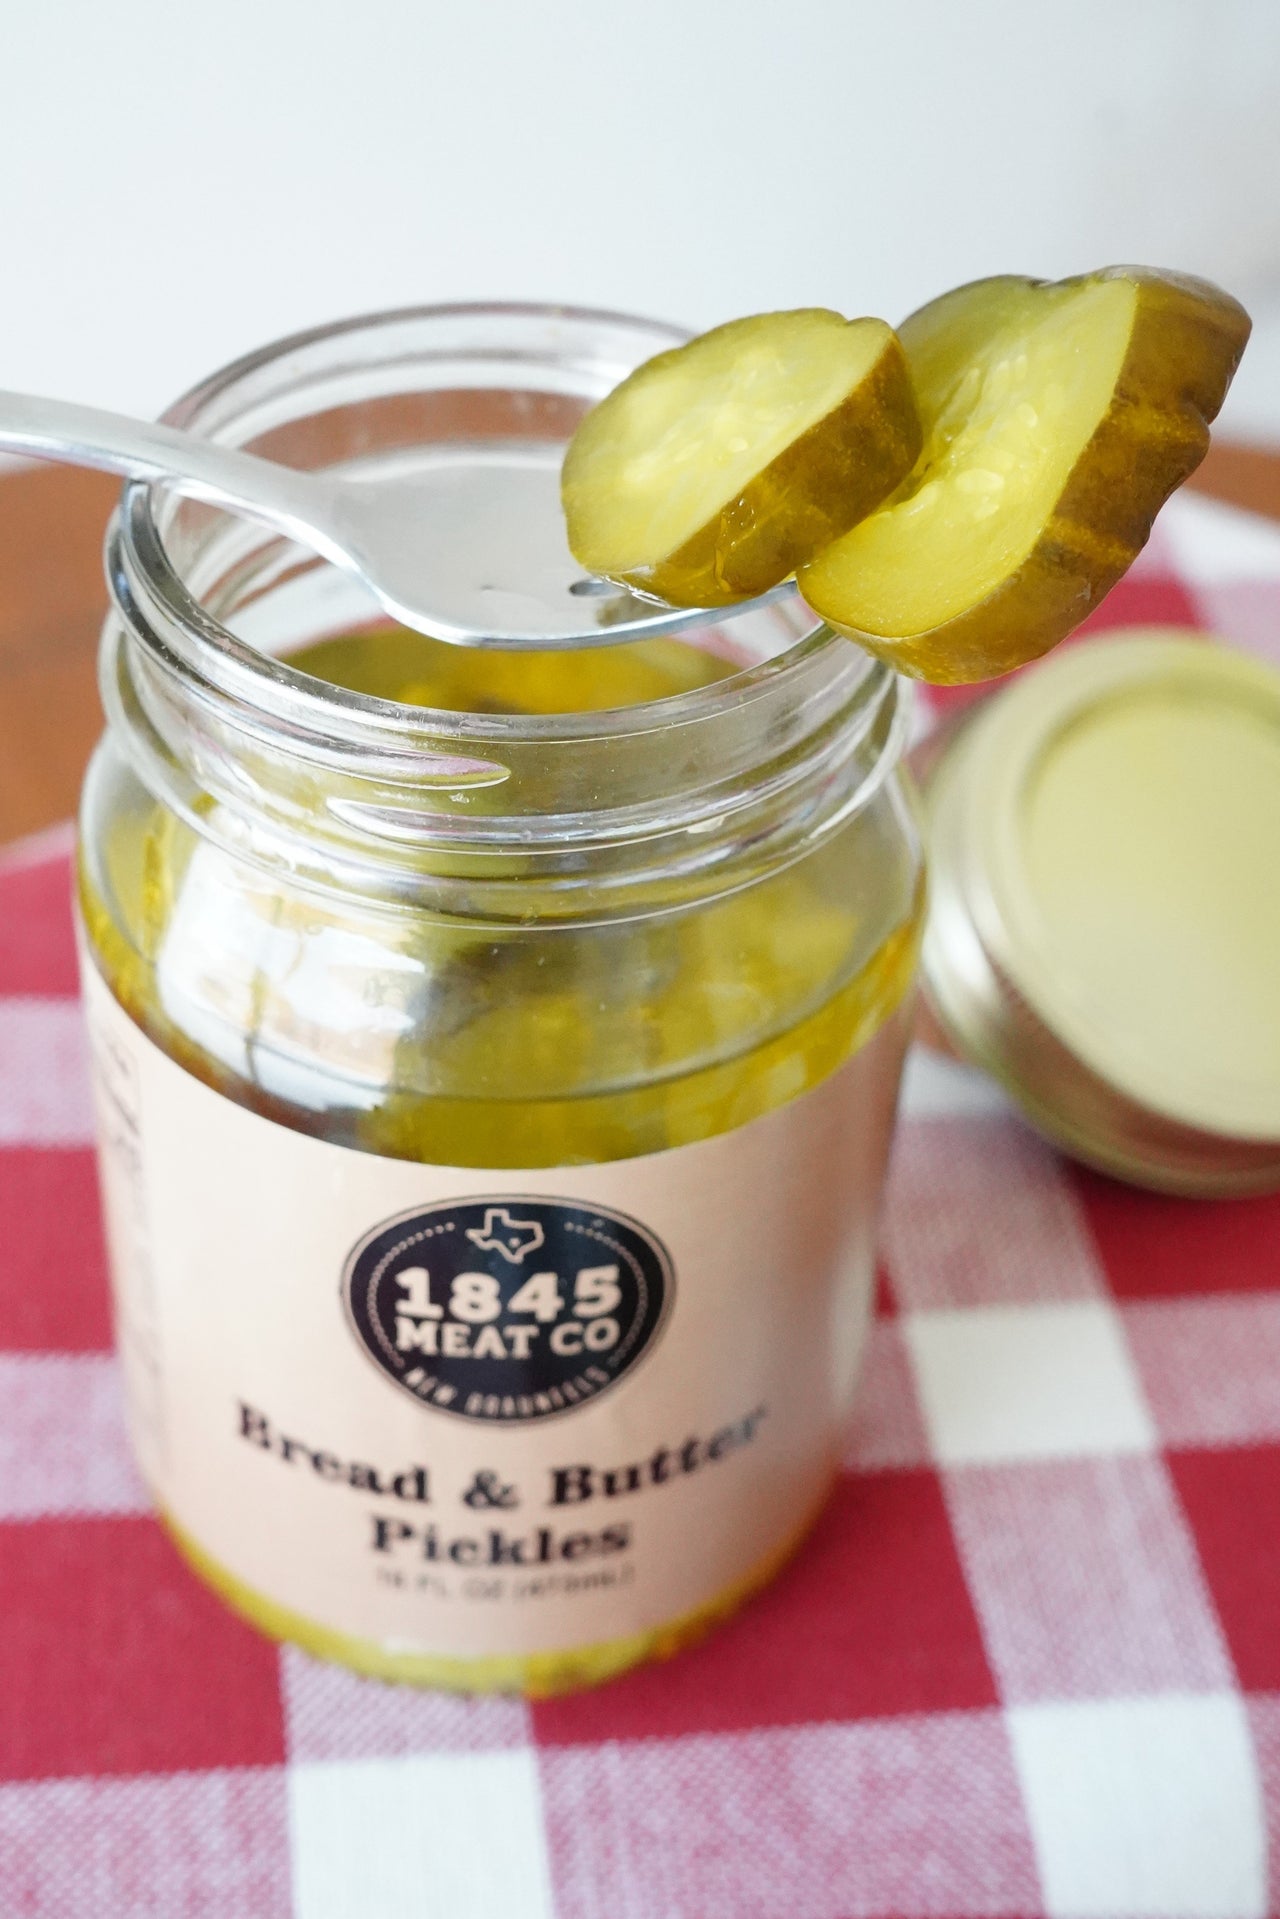 A little bit of sweetness to make a crispy bread and butter pickle.